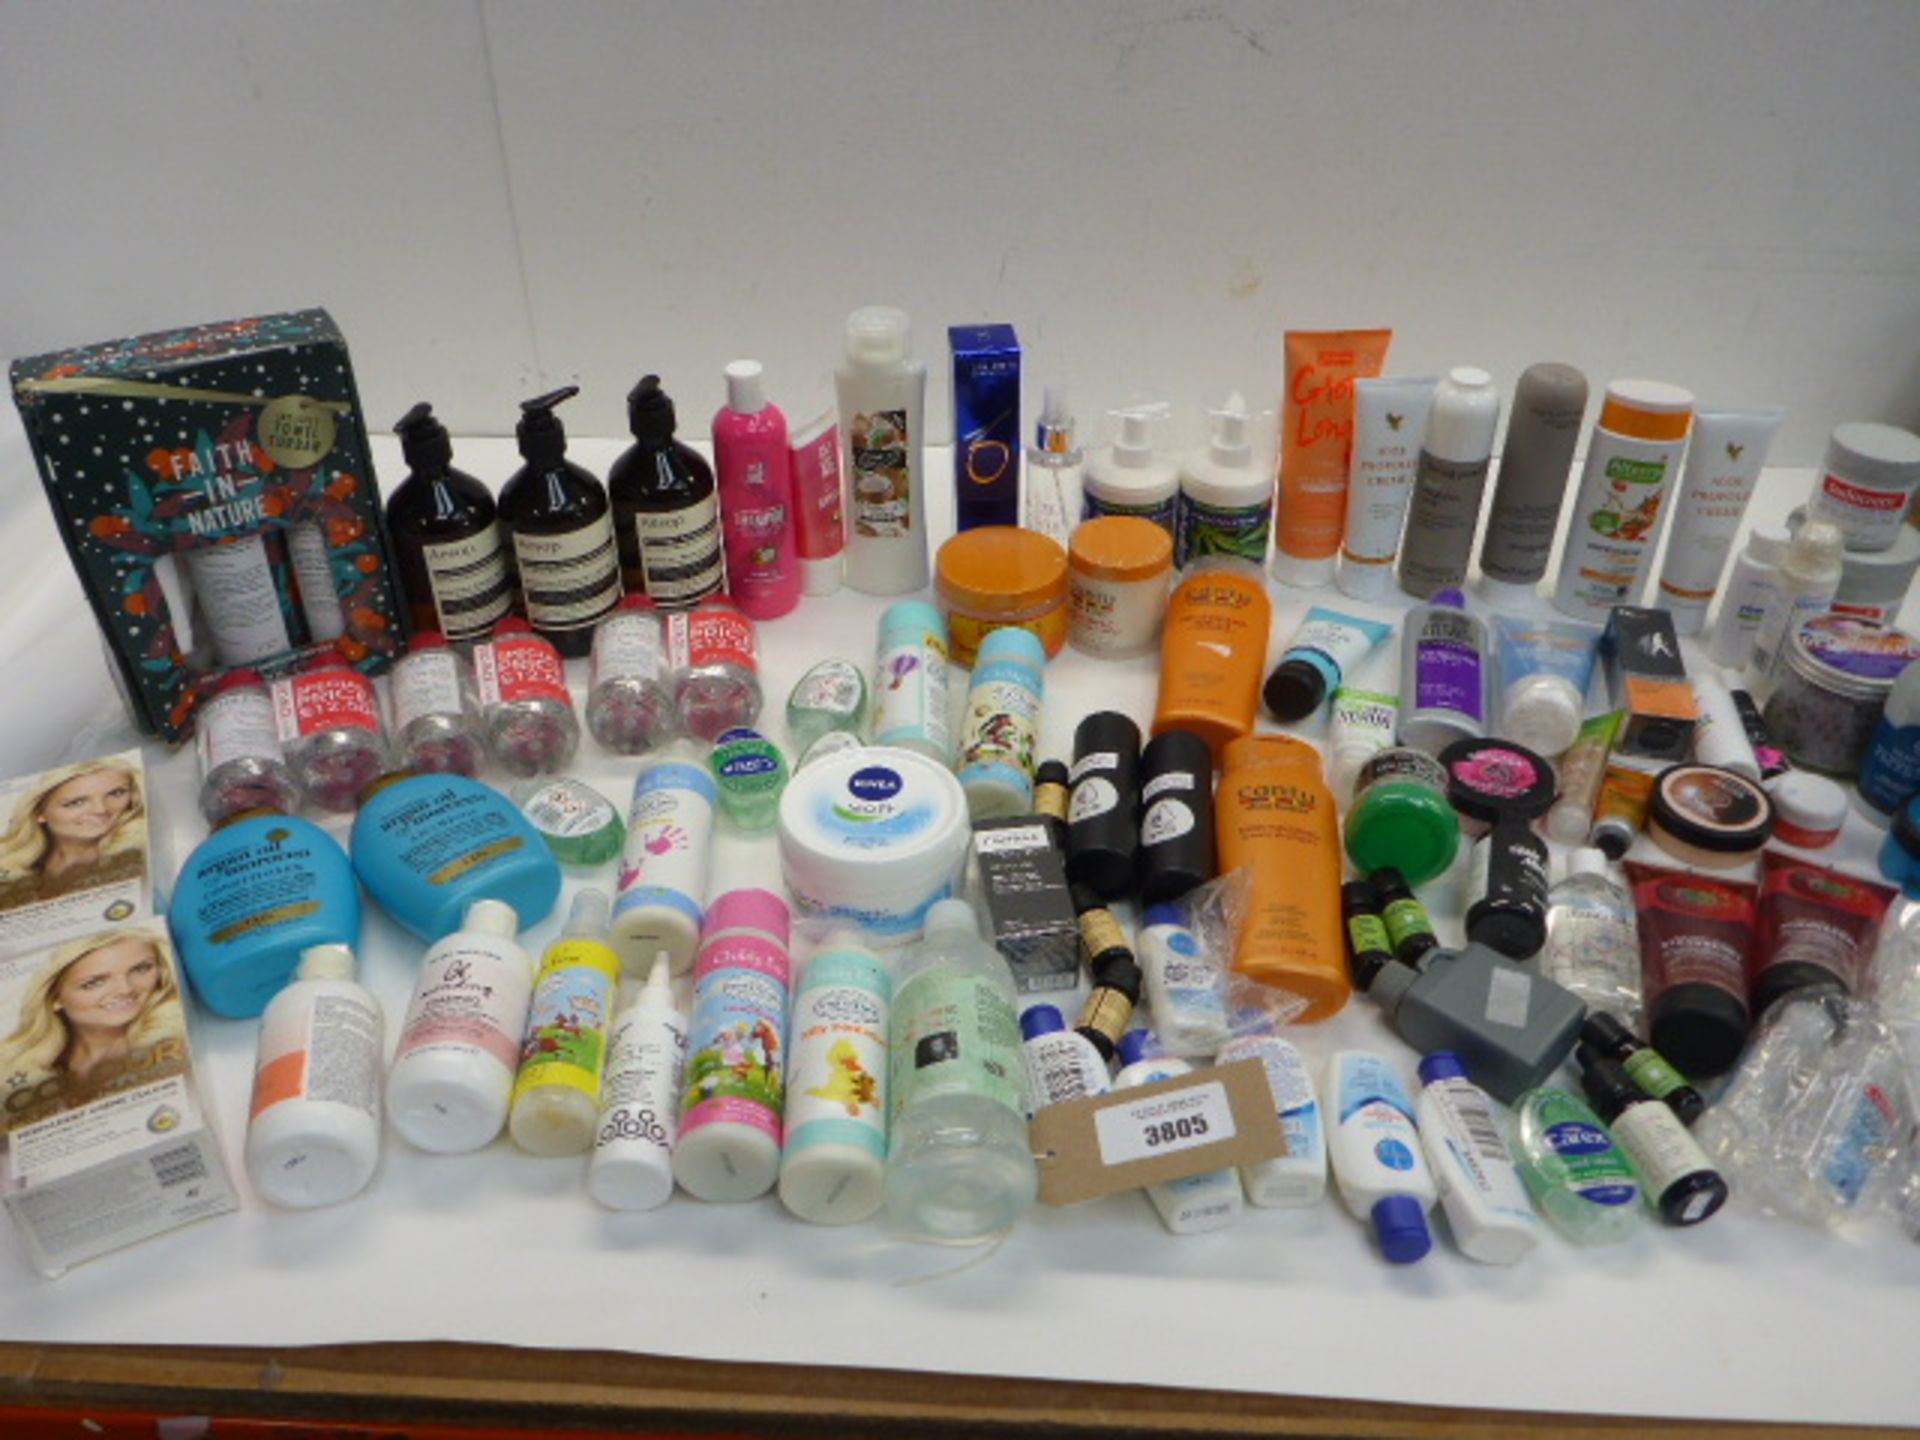 Large bag of toiletries including essential oils, hair colour, conditioner, shampoo, sanitizers,